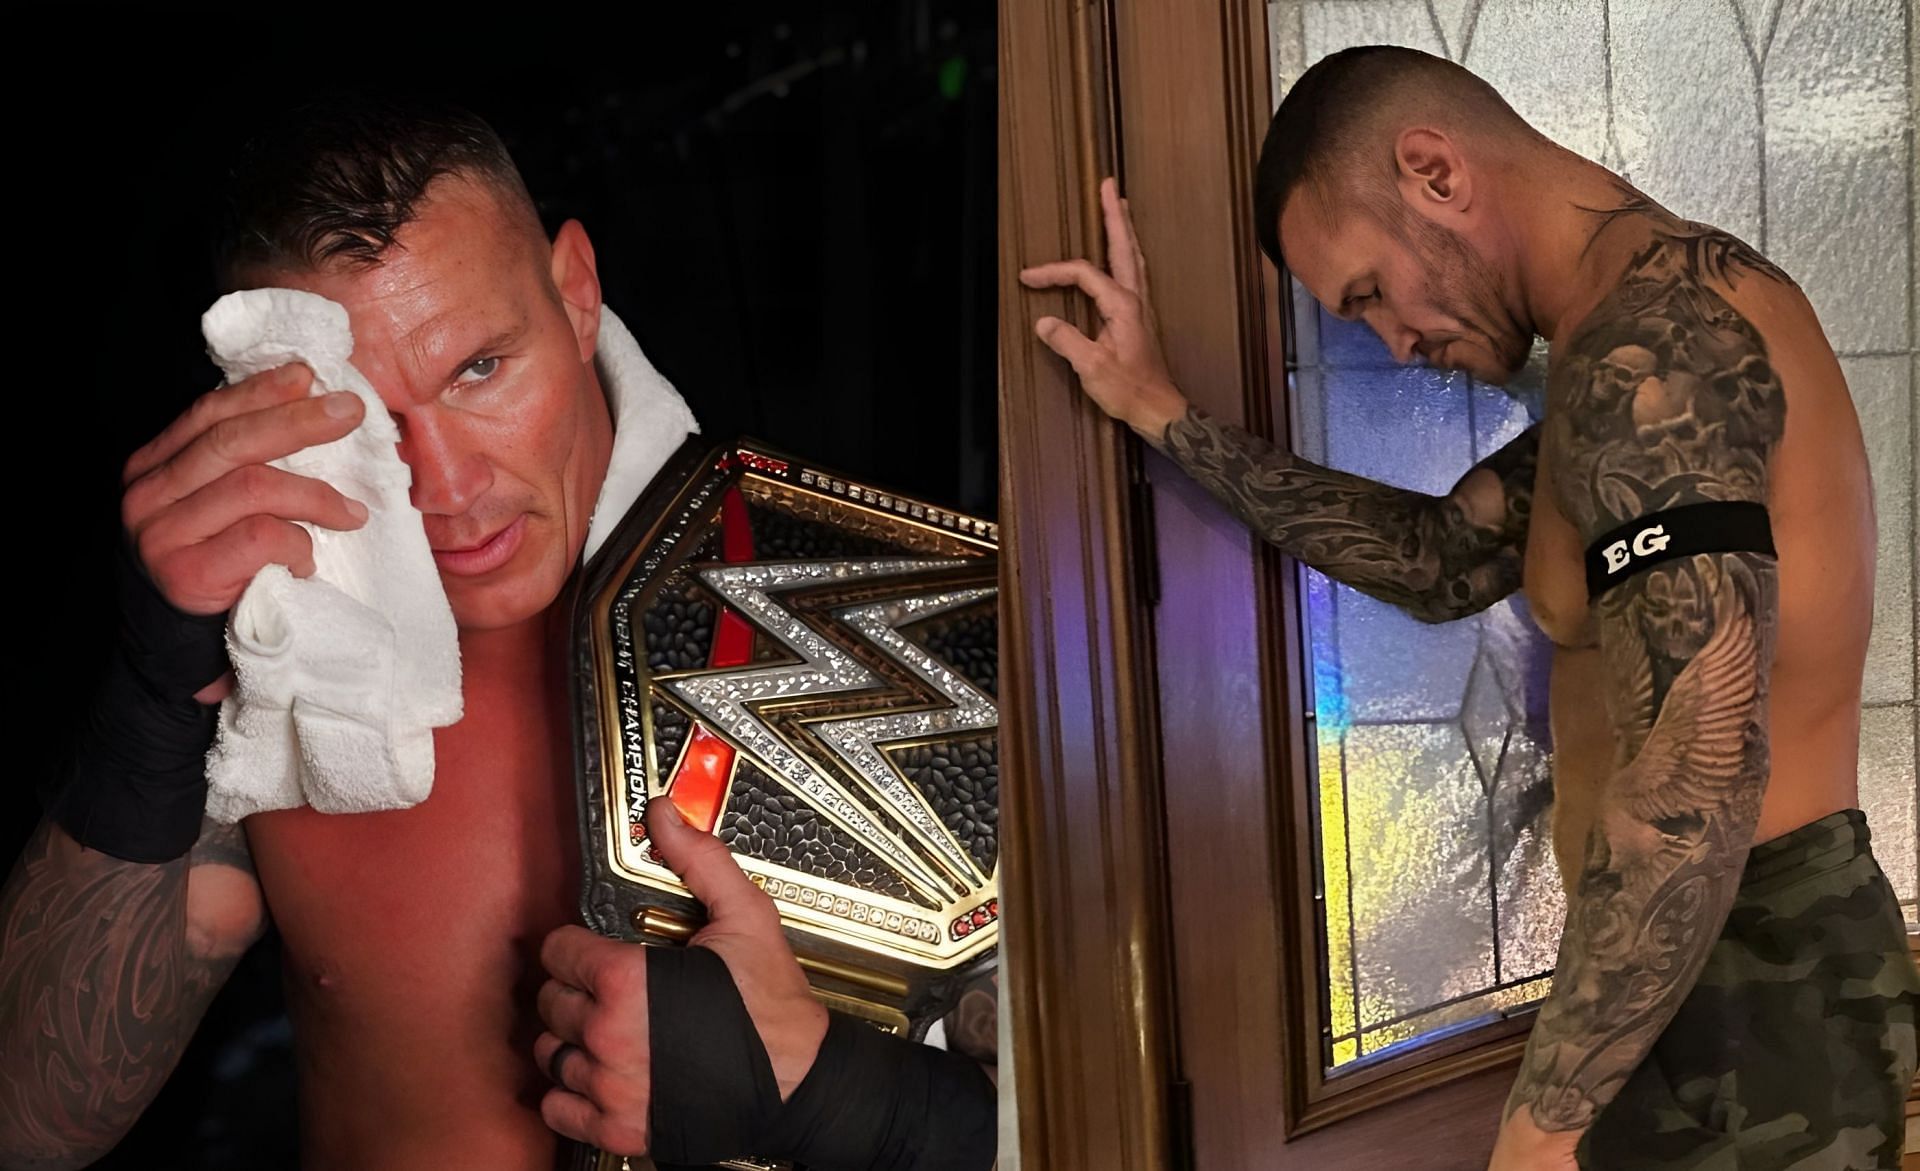 Randy Orton is currently drafted on SmackDown